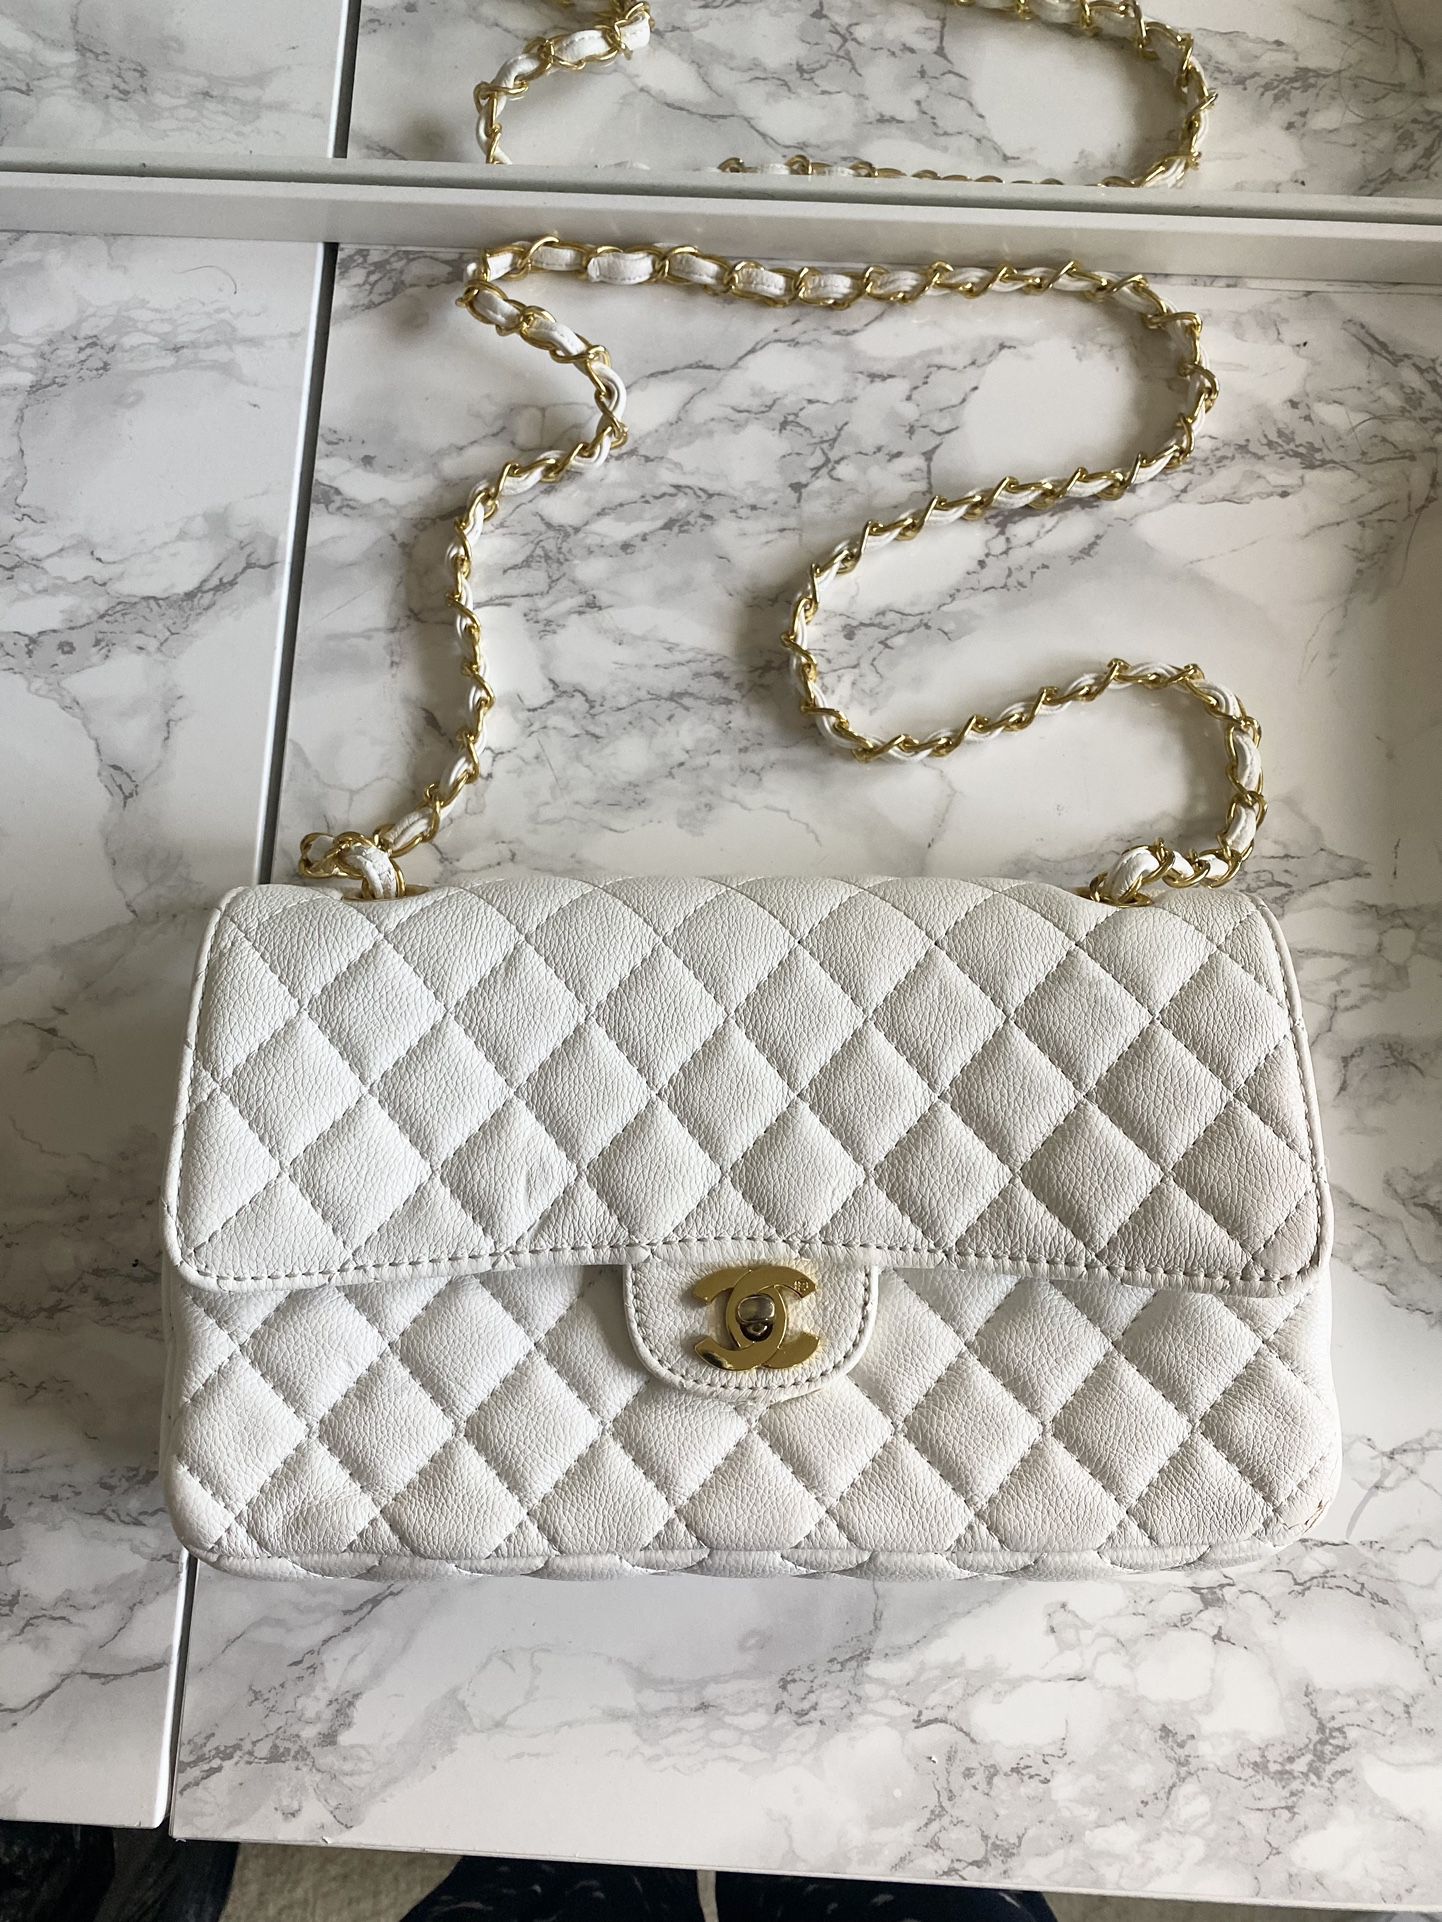 PRELOVED VINTAGE CHANEL DOUBLE FLAP MEDIUM BAG WHITE CAVIAR LEATHER GHW